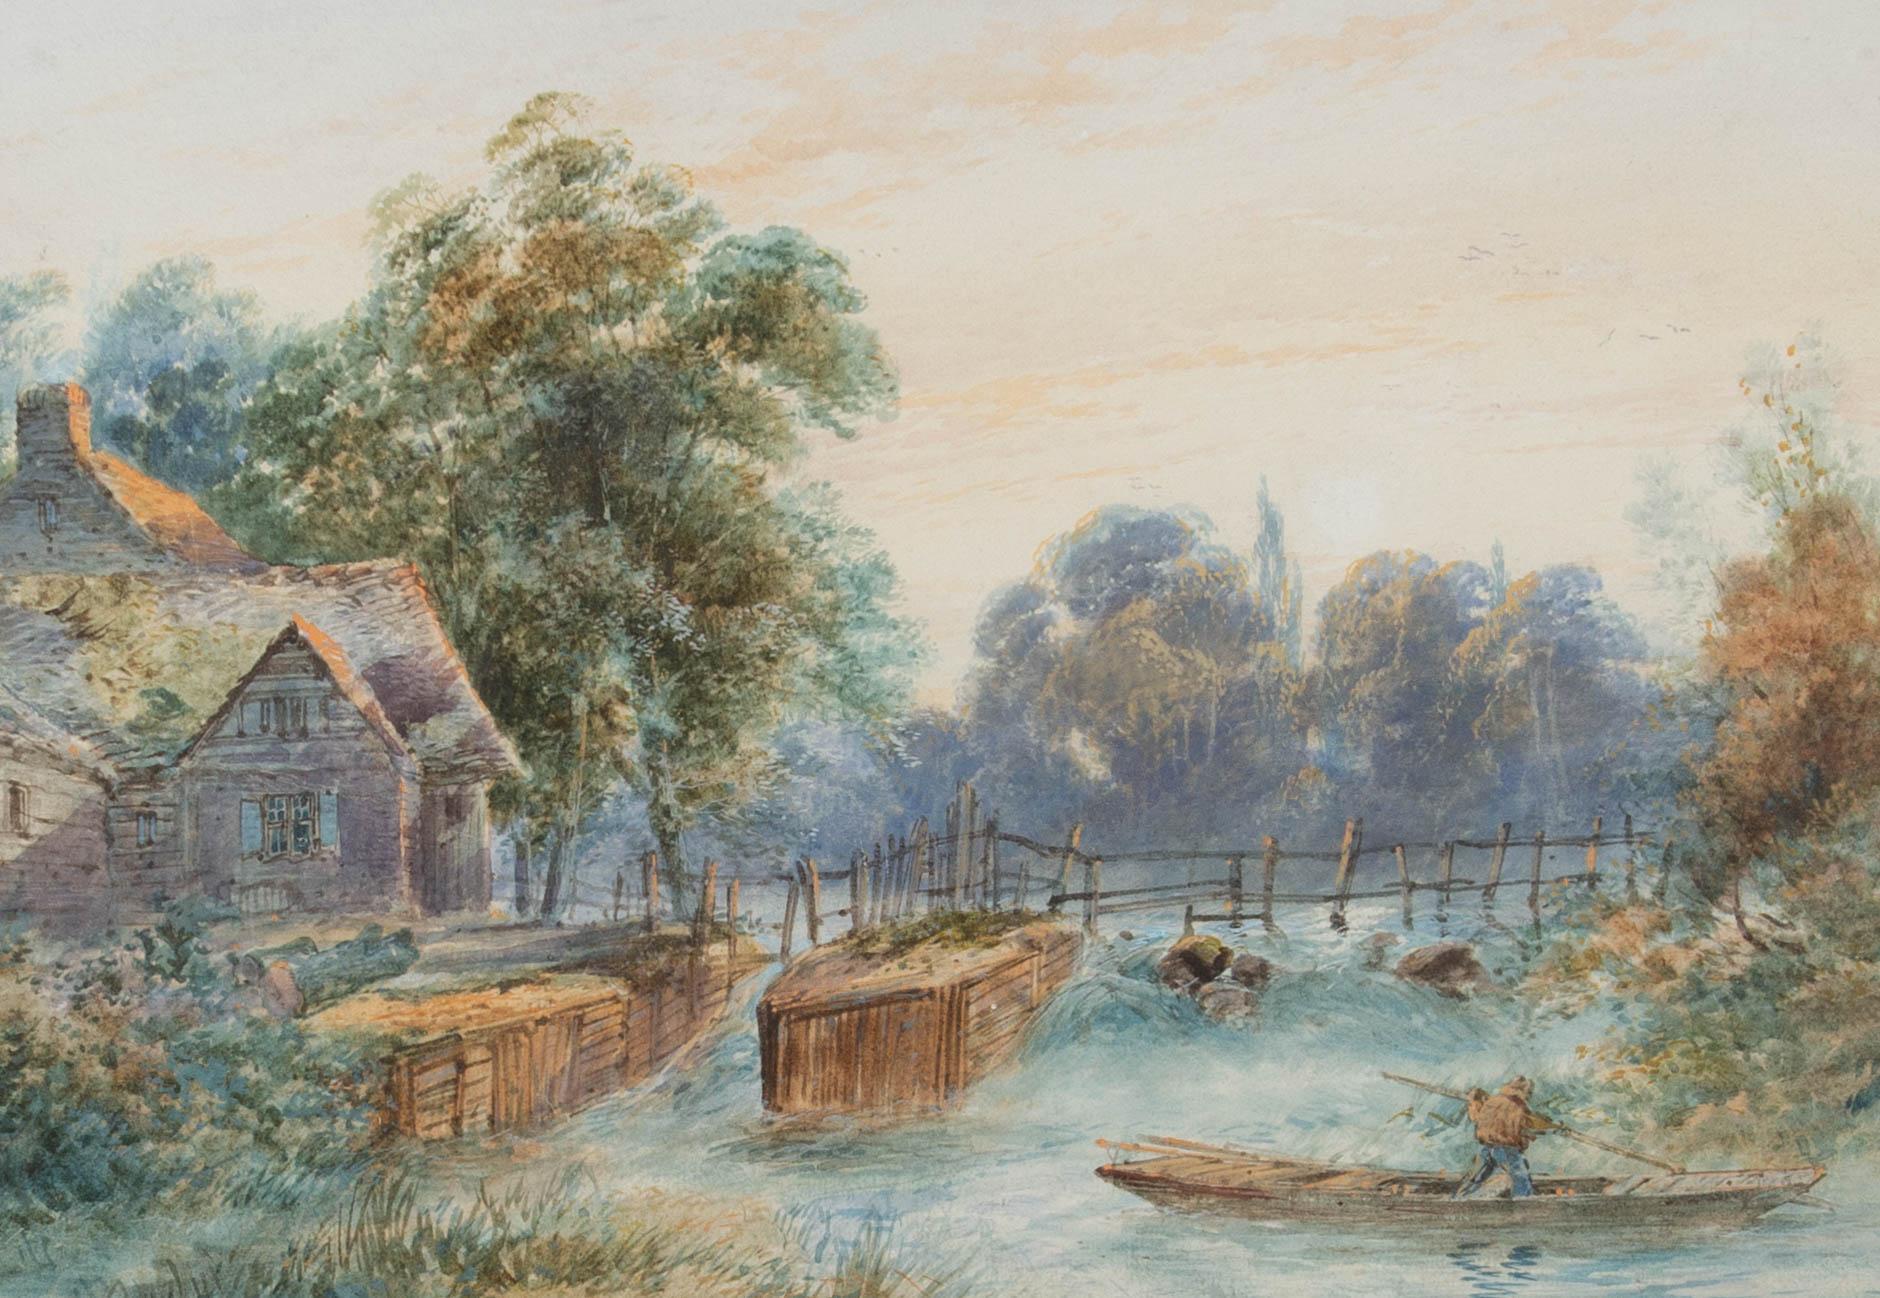 A charming watercolour painting with gouache details, depicting a river scene with a cottage and a figure on a small boat. Unsigned. Well-presented in a wash line card mount and in a distressed, gilt effect frame. On watercolour paper.